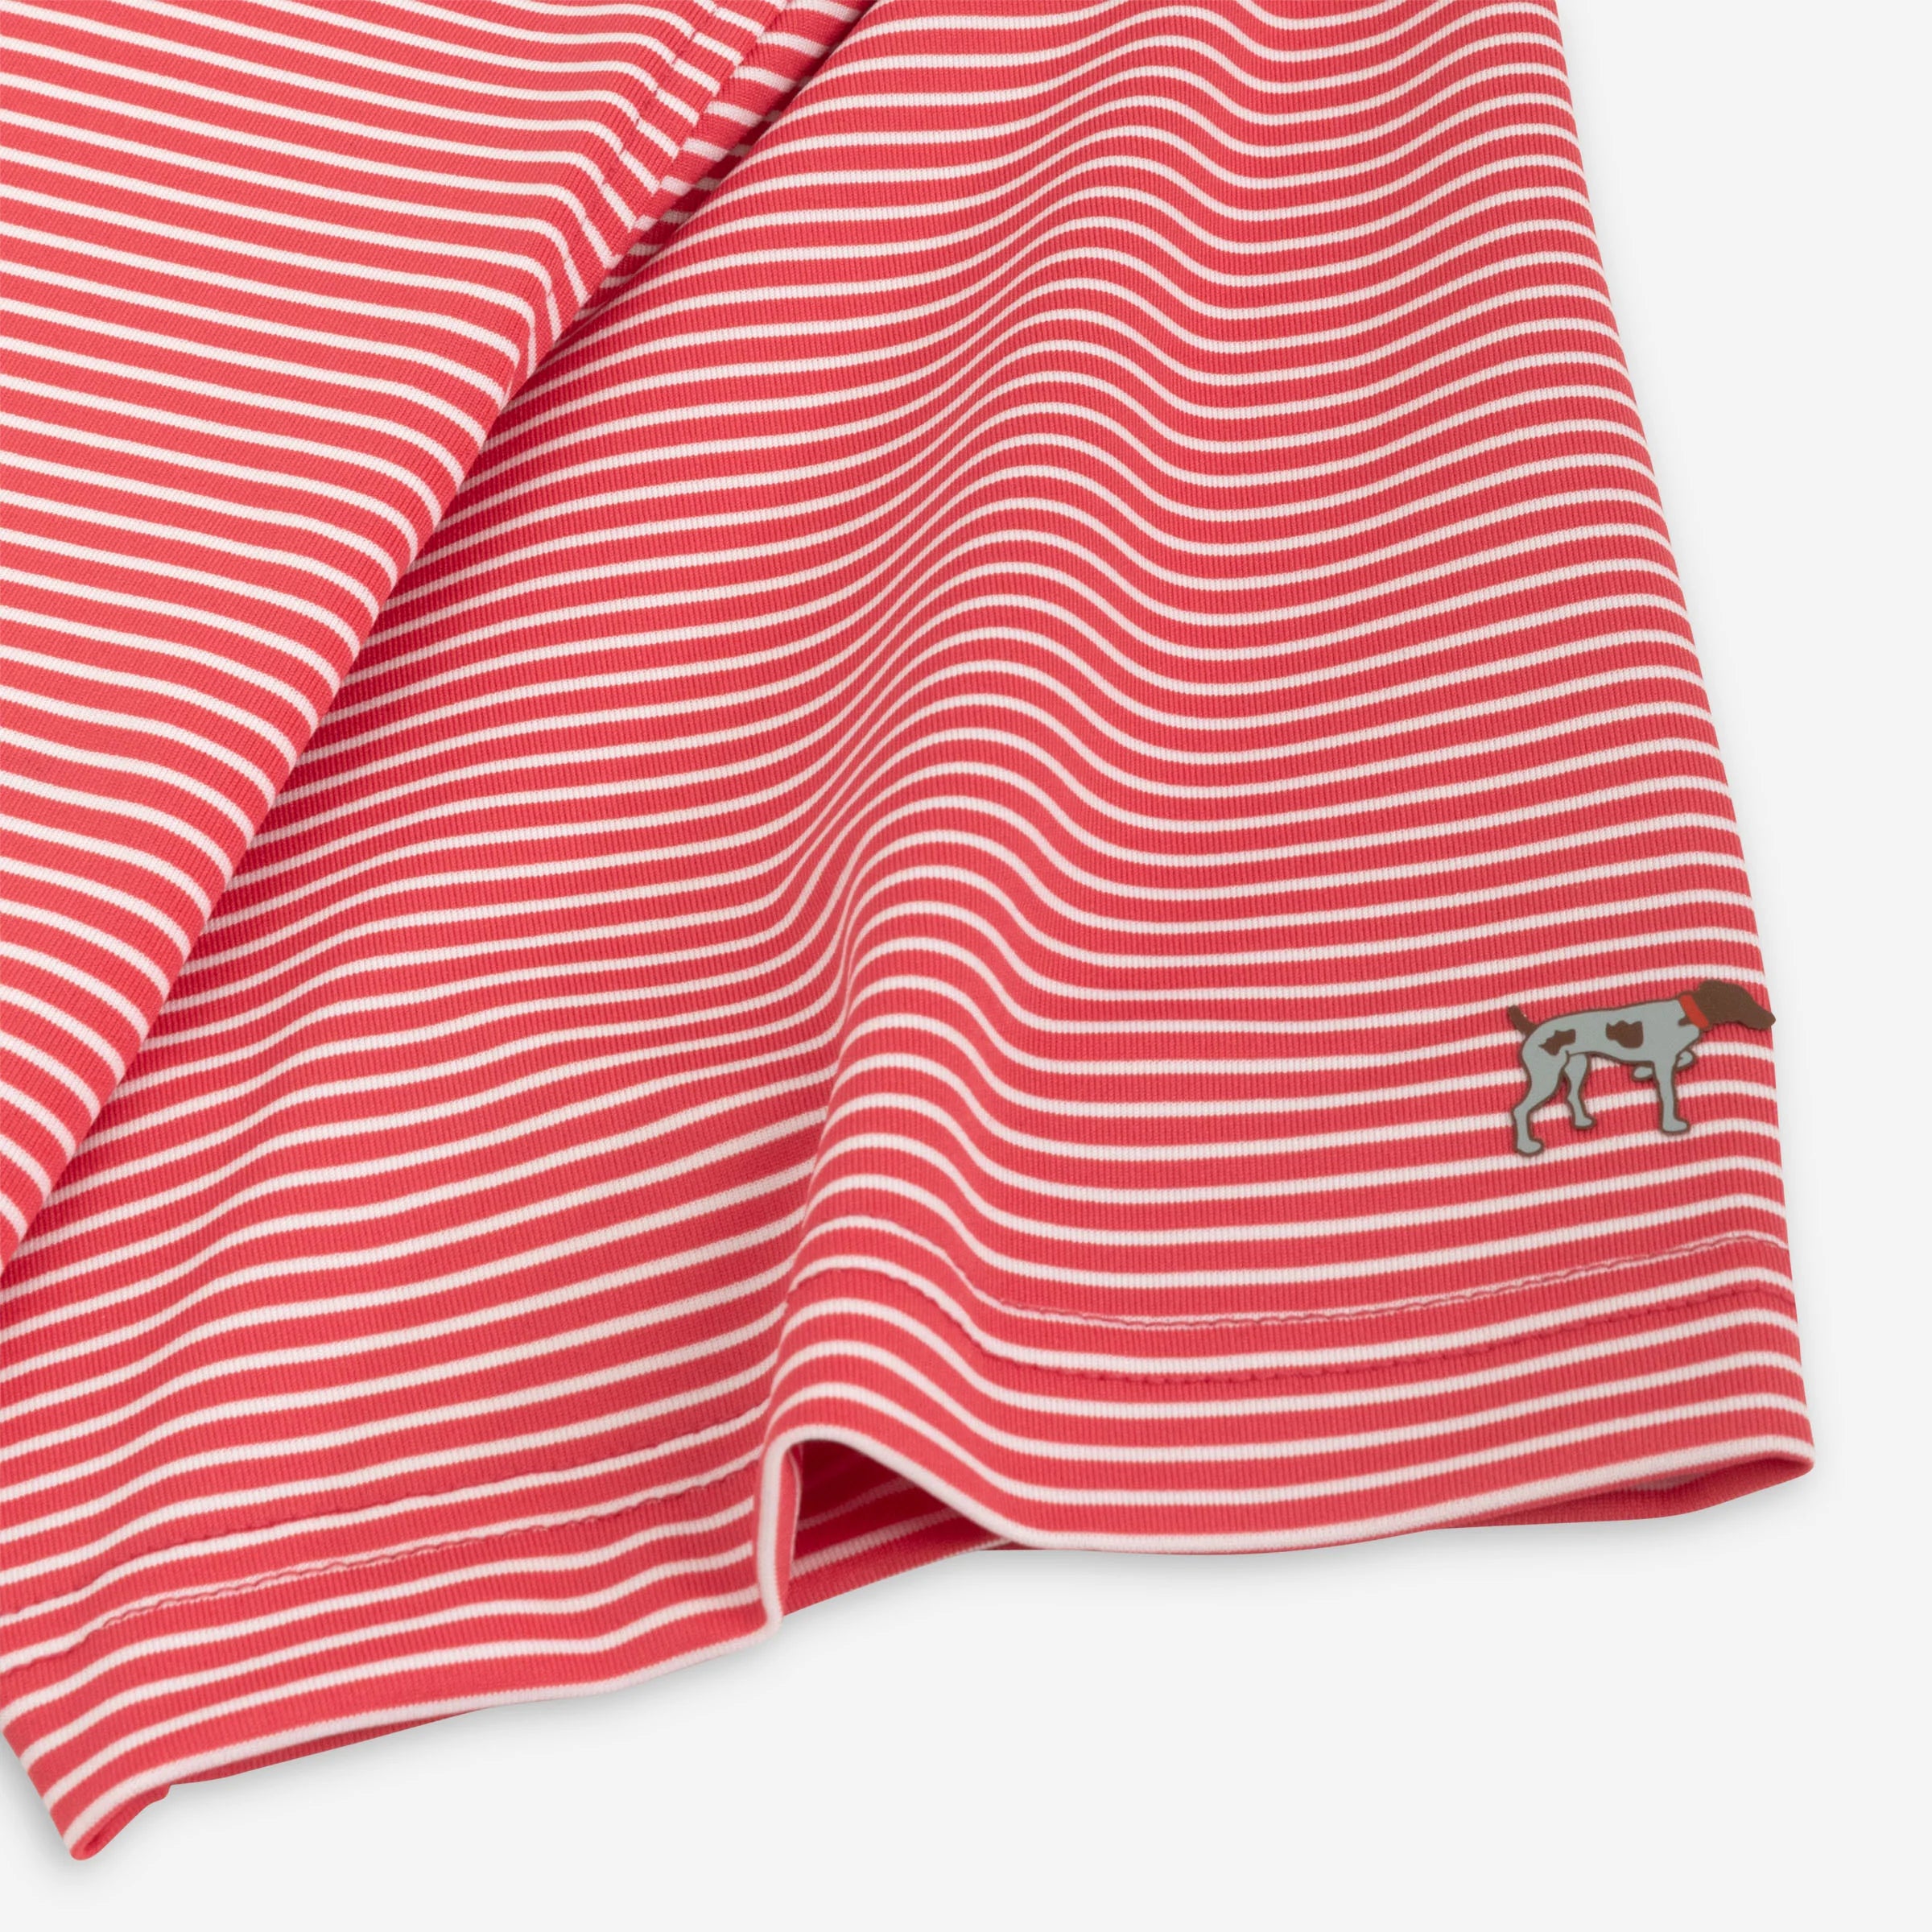 Dune Stripe YOUTH Polo in Washed Red by Southern Point Co.